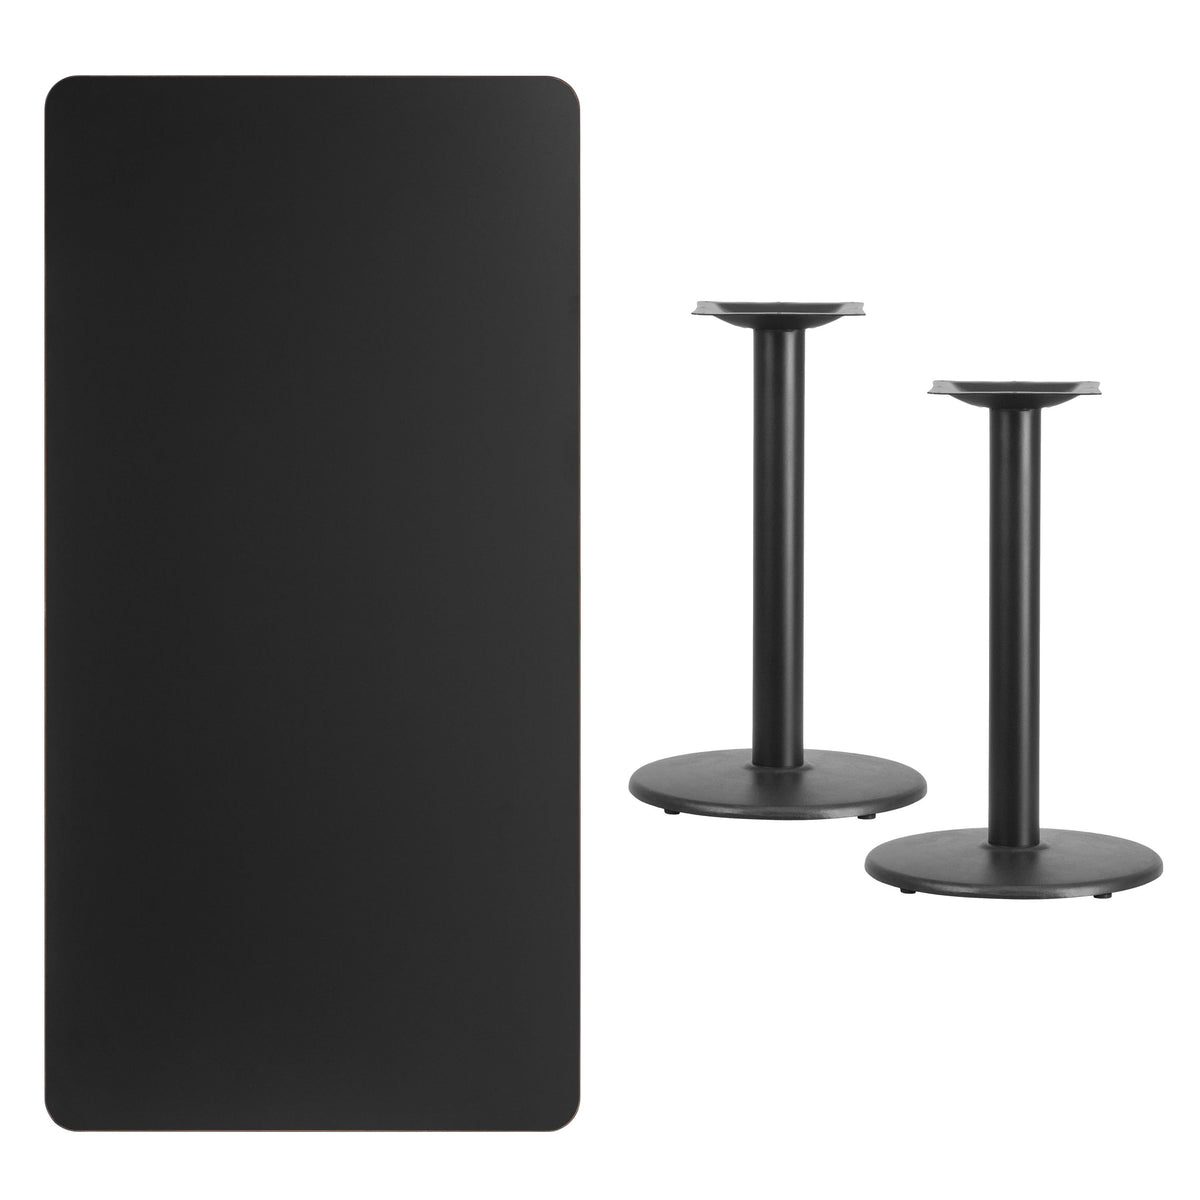 Black |#| 30inch x 60inch Rectangular Black Laminate Table Top with 18inch Round Table Height Bases